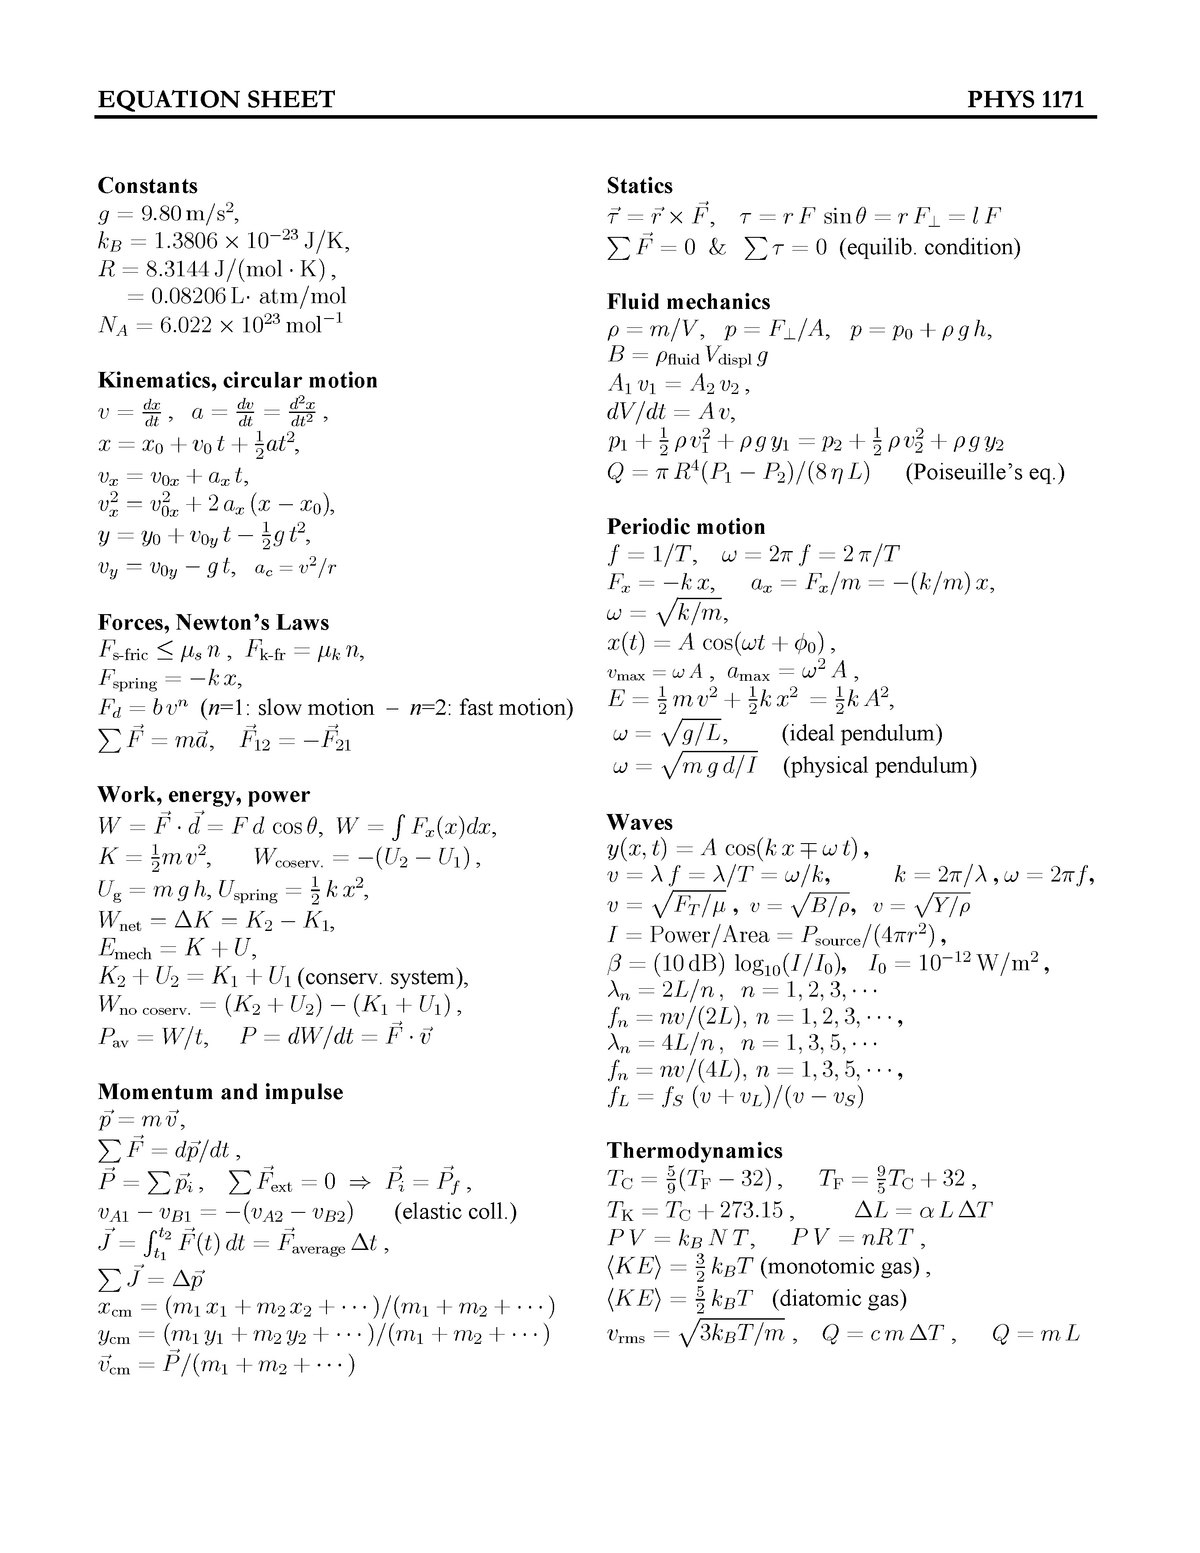 Equation Sheet Final Test Phys 1171 Lab For Physics 1171 Phys 1172 Studocu